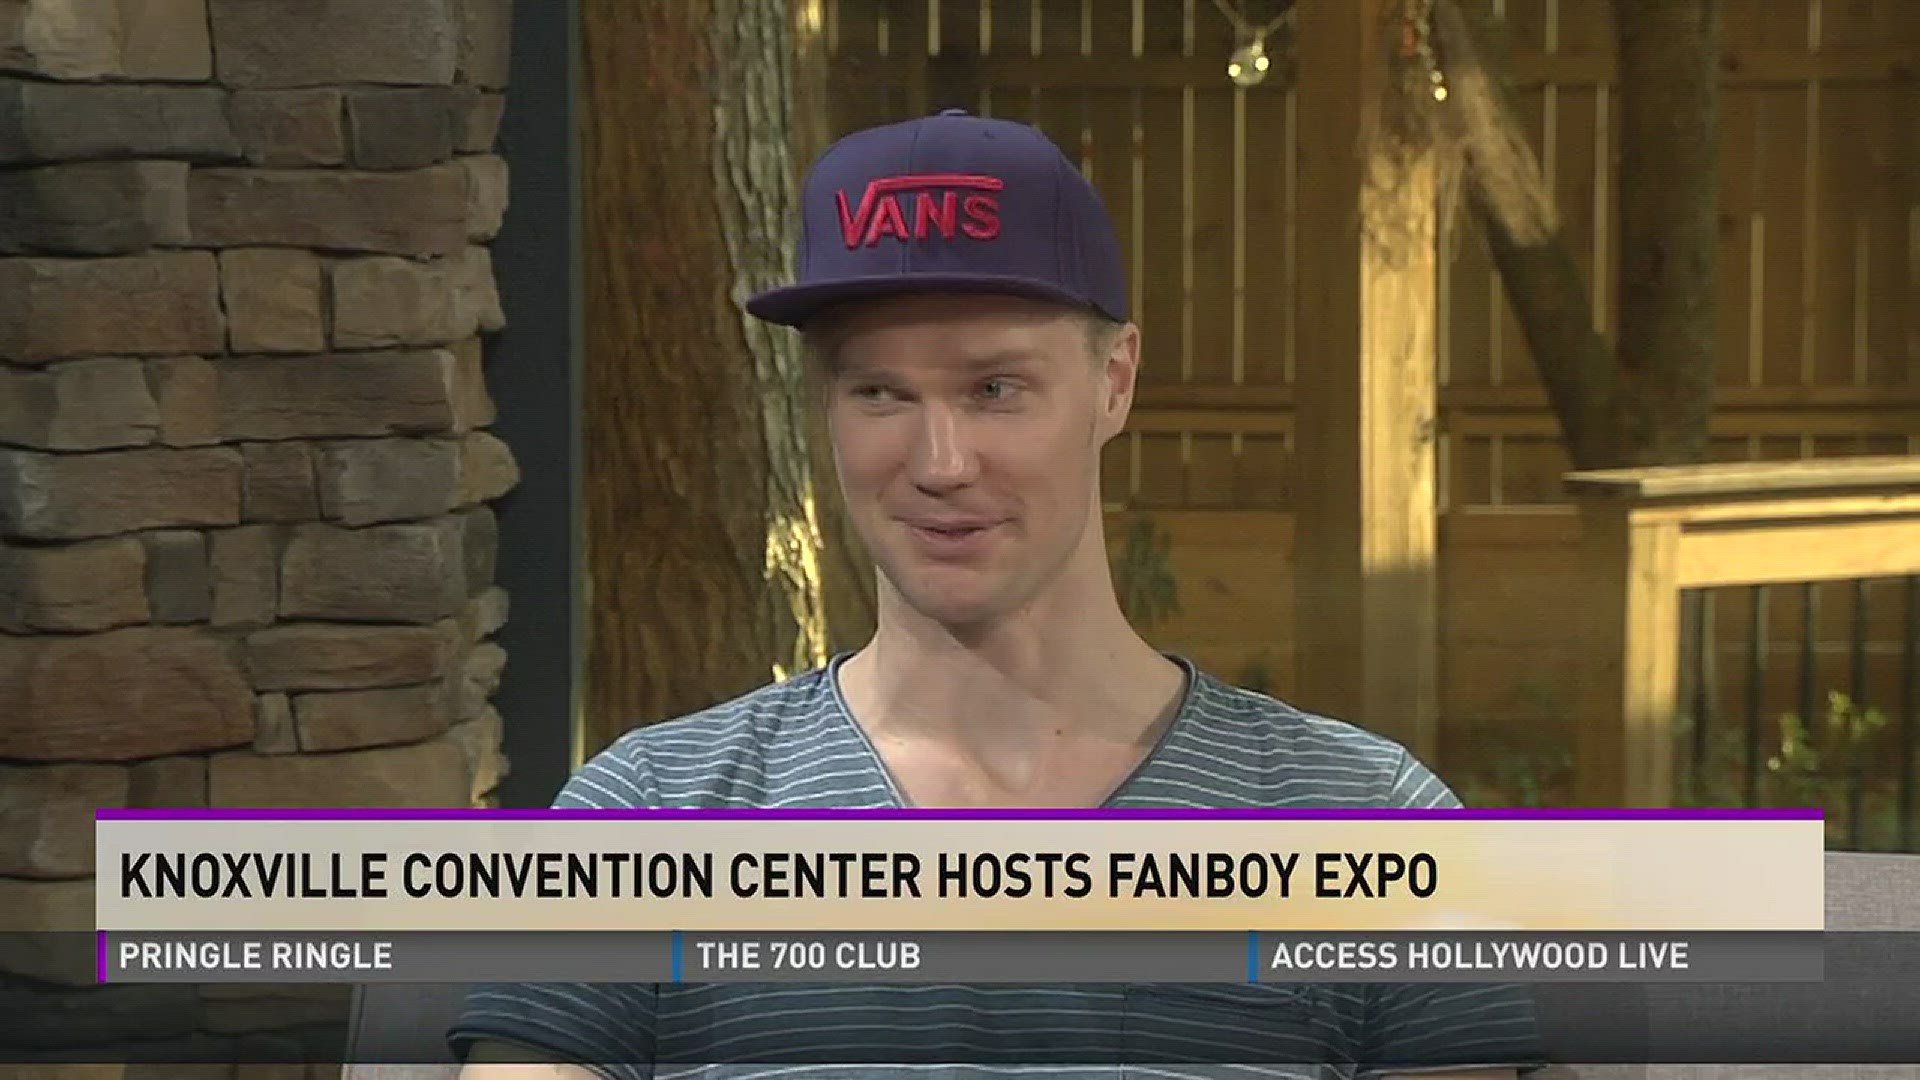 Joonas Suotamo played Chewbacca in "Star Wars: The Force Awakens." He's in town as part of the Fanboy Expo at the Knoxville Convention Center.